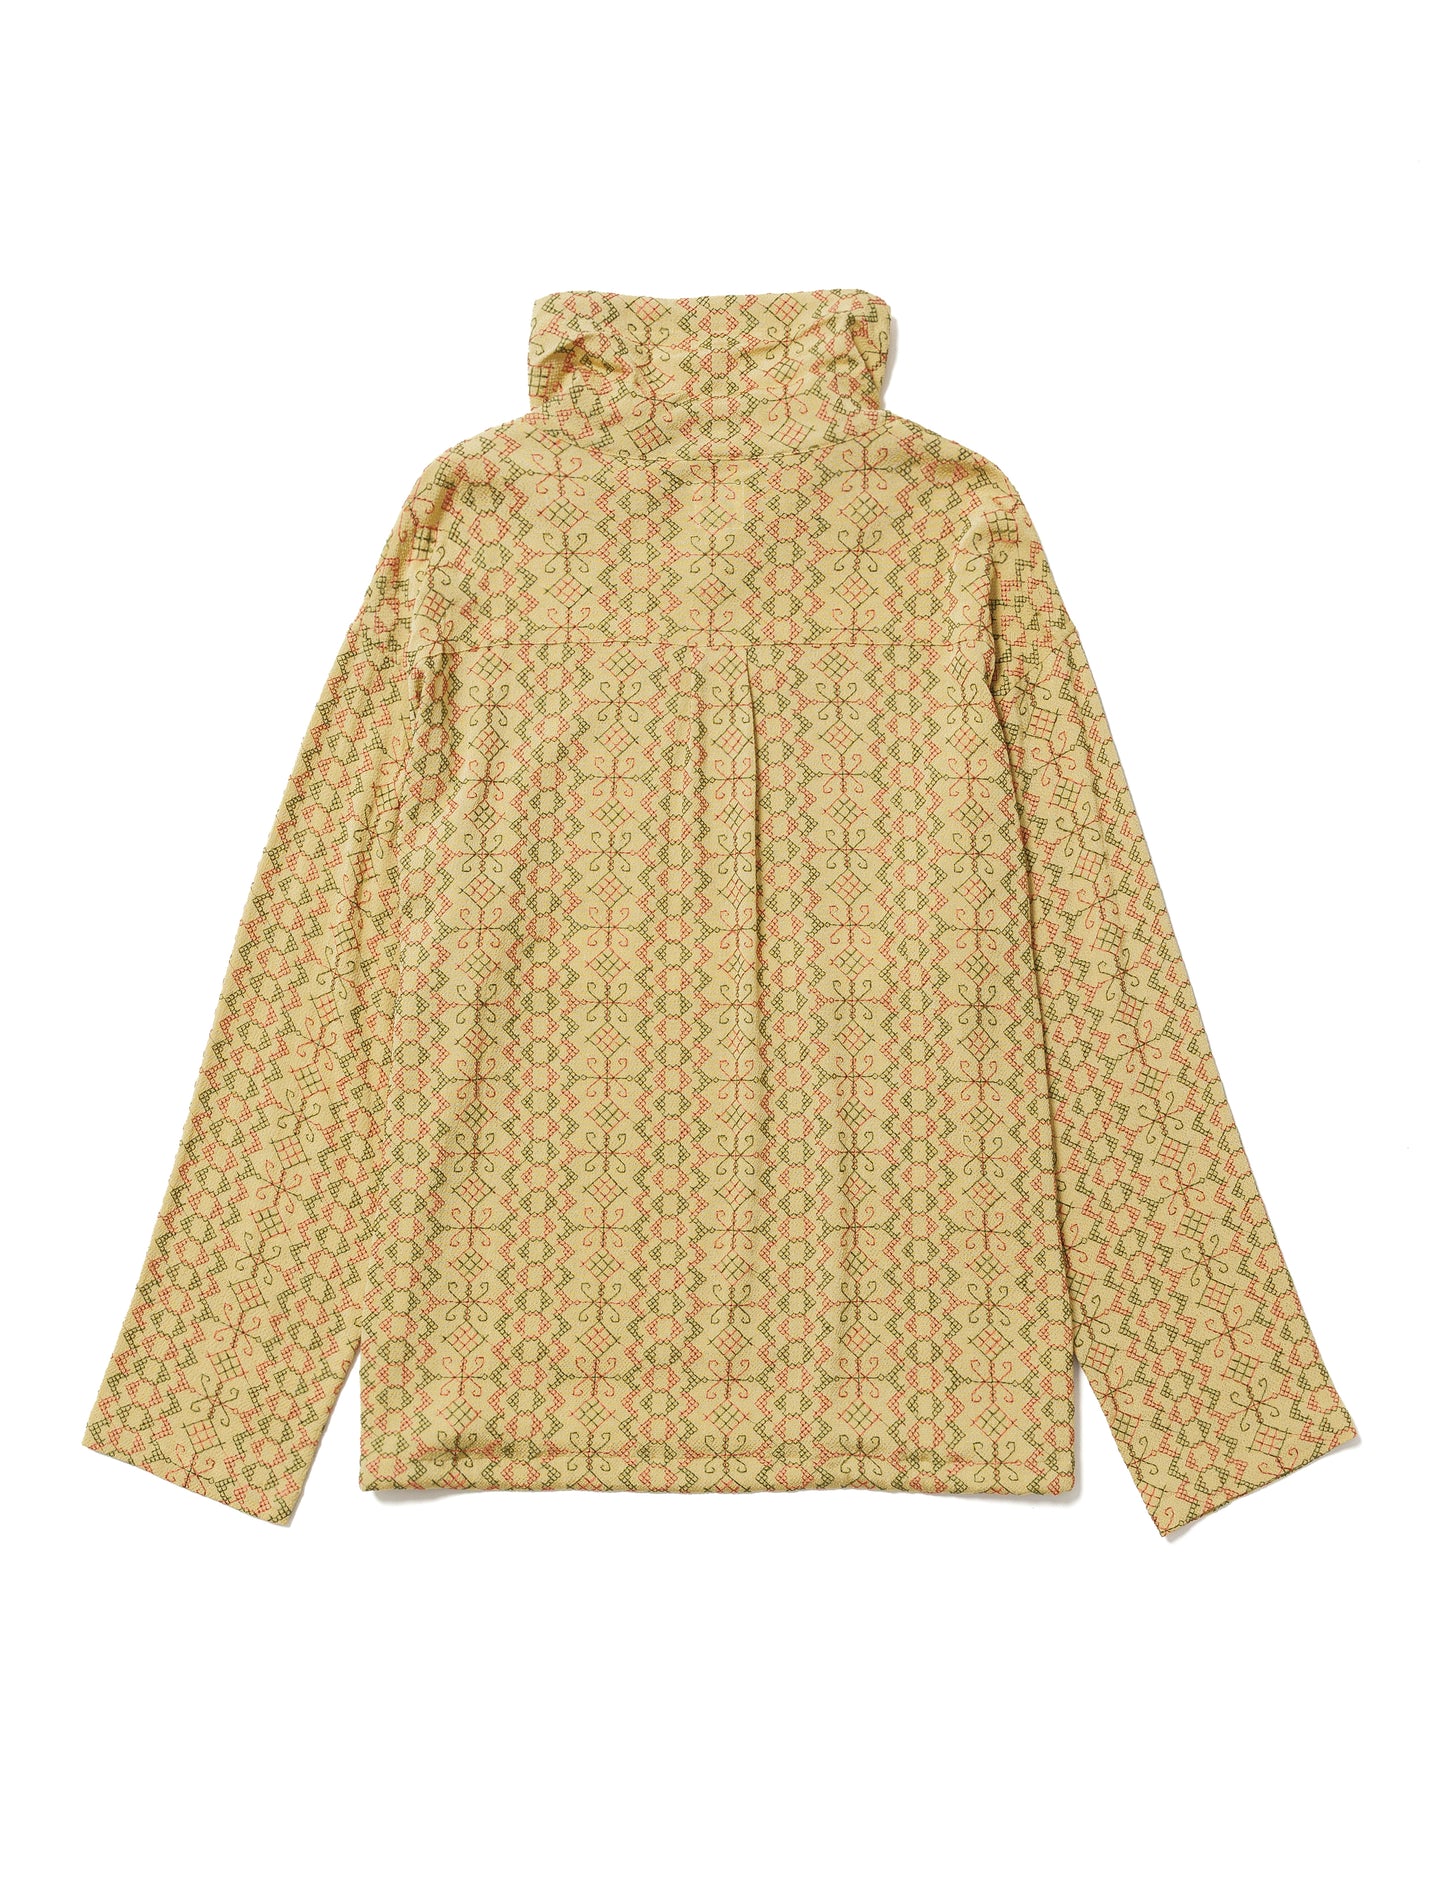 24SS-SY9-005 / HINECK PULLOVER SHIRT / YELLOW